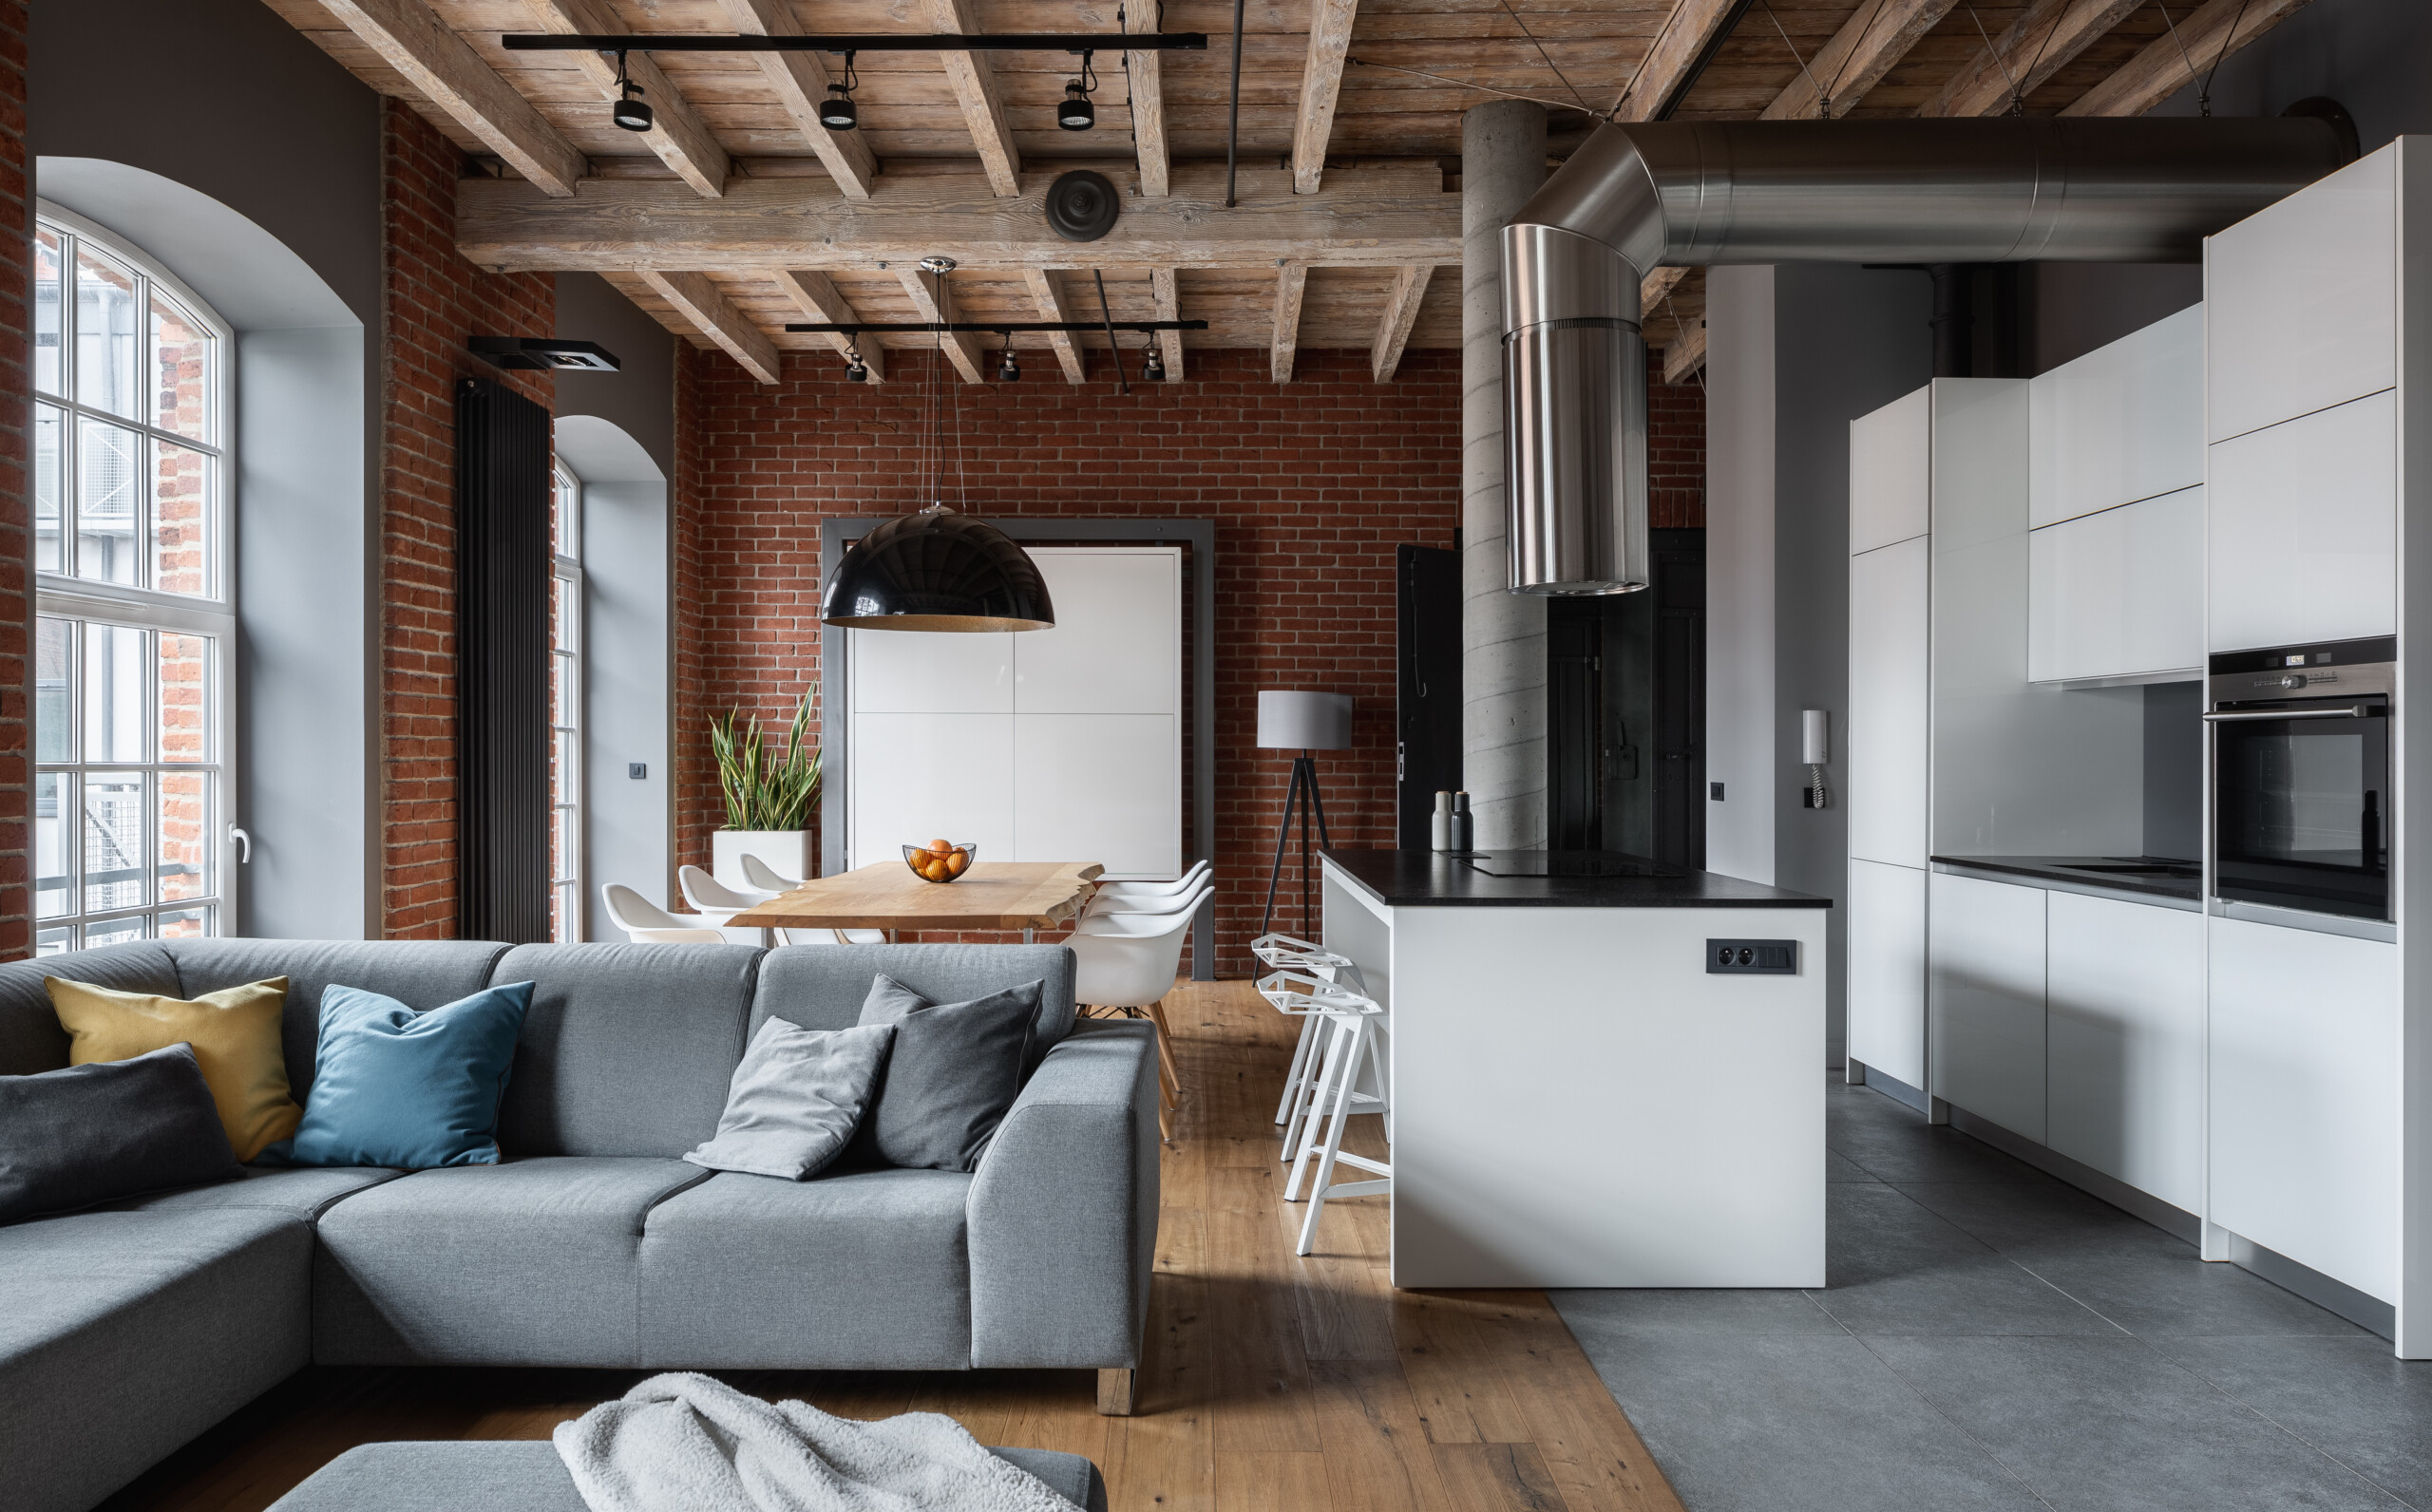 Inspiring Industrial Style Defined And How To Get The Look - Décor Aid